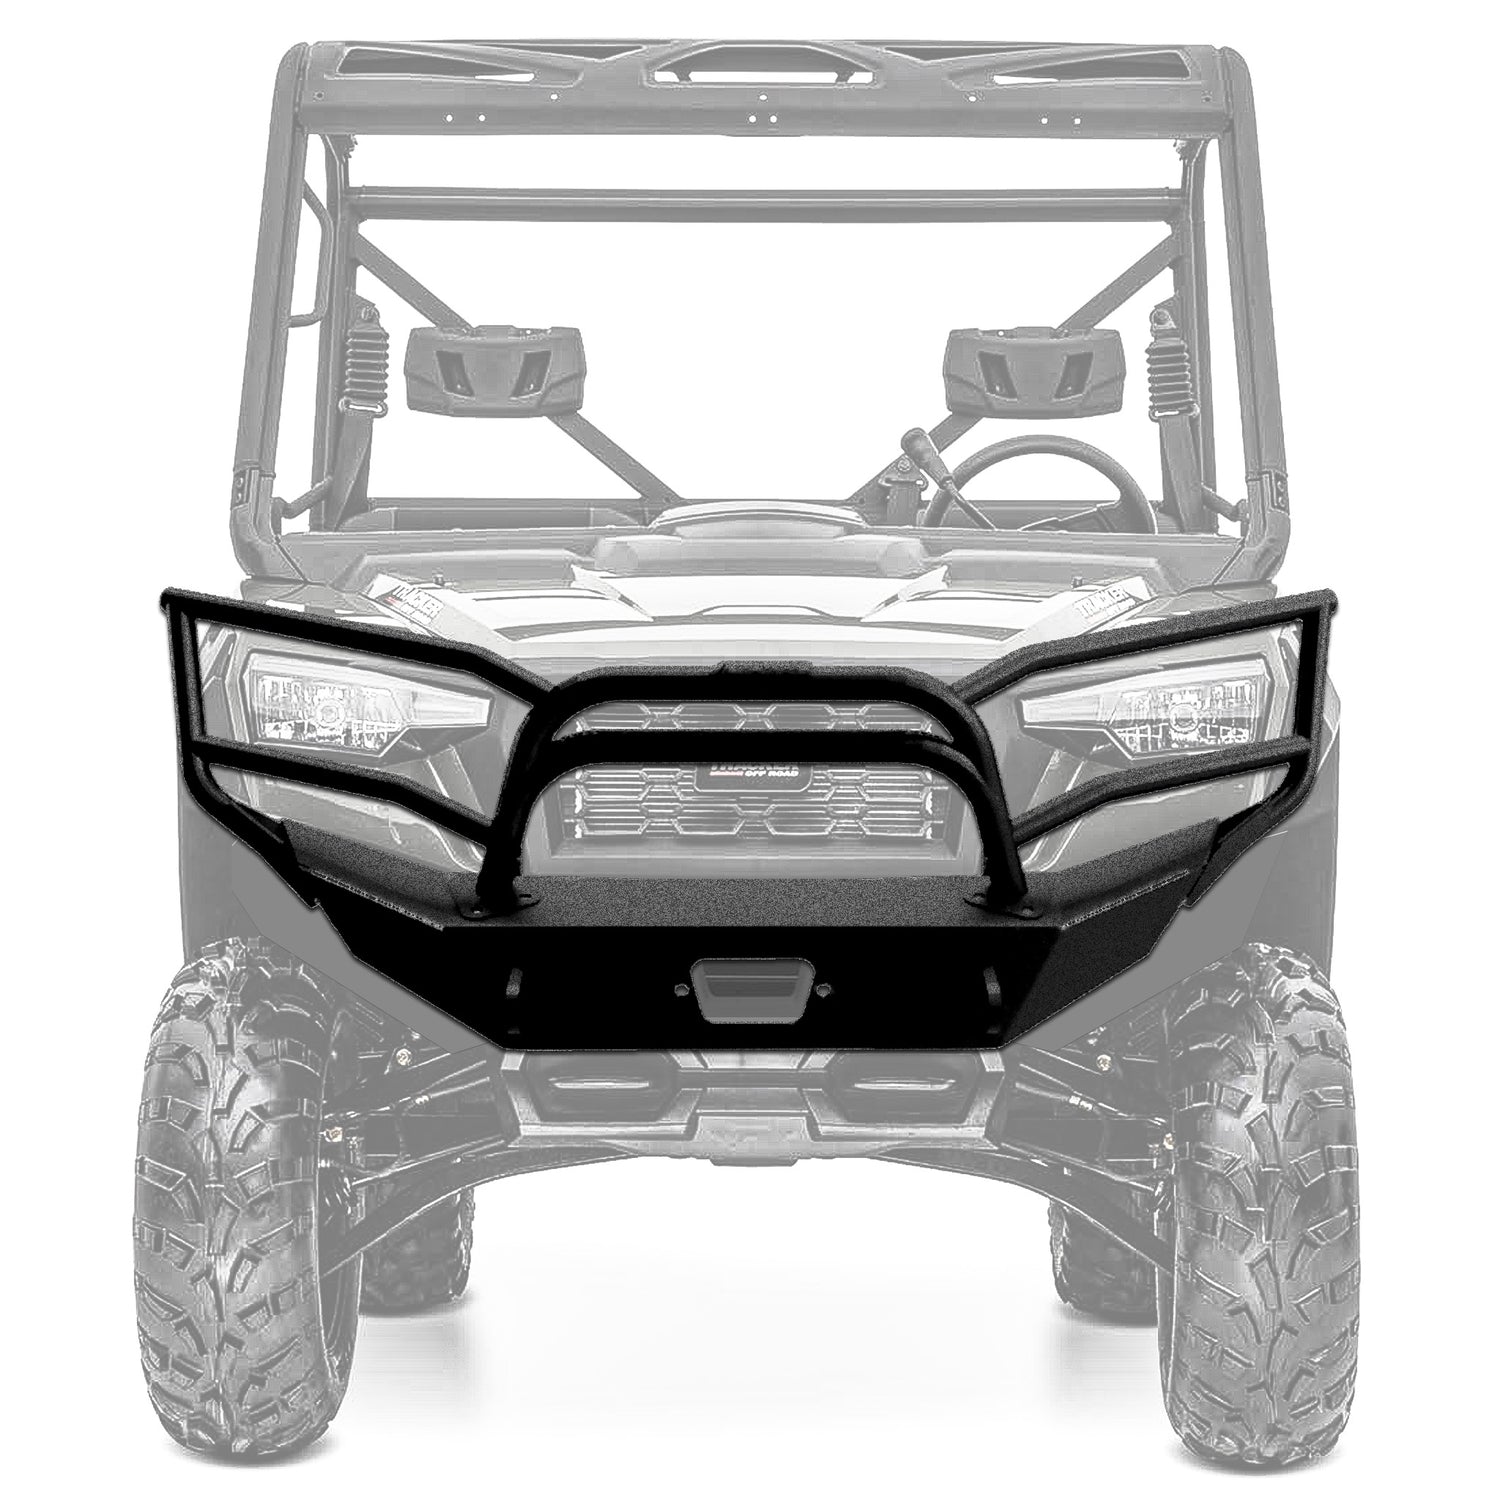 High-Quality Tracker 800SX Bumpers & Accessories for the Ultimate Outdoorsman